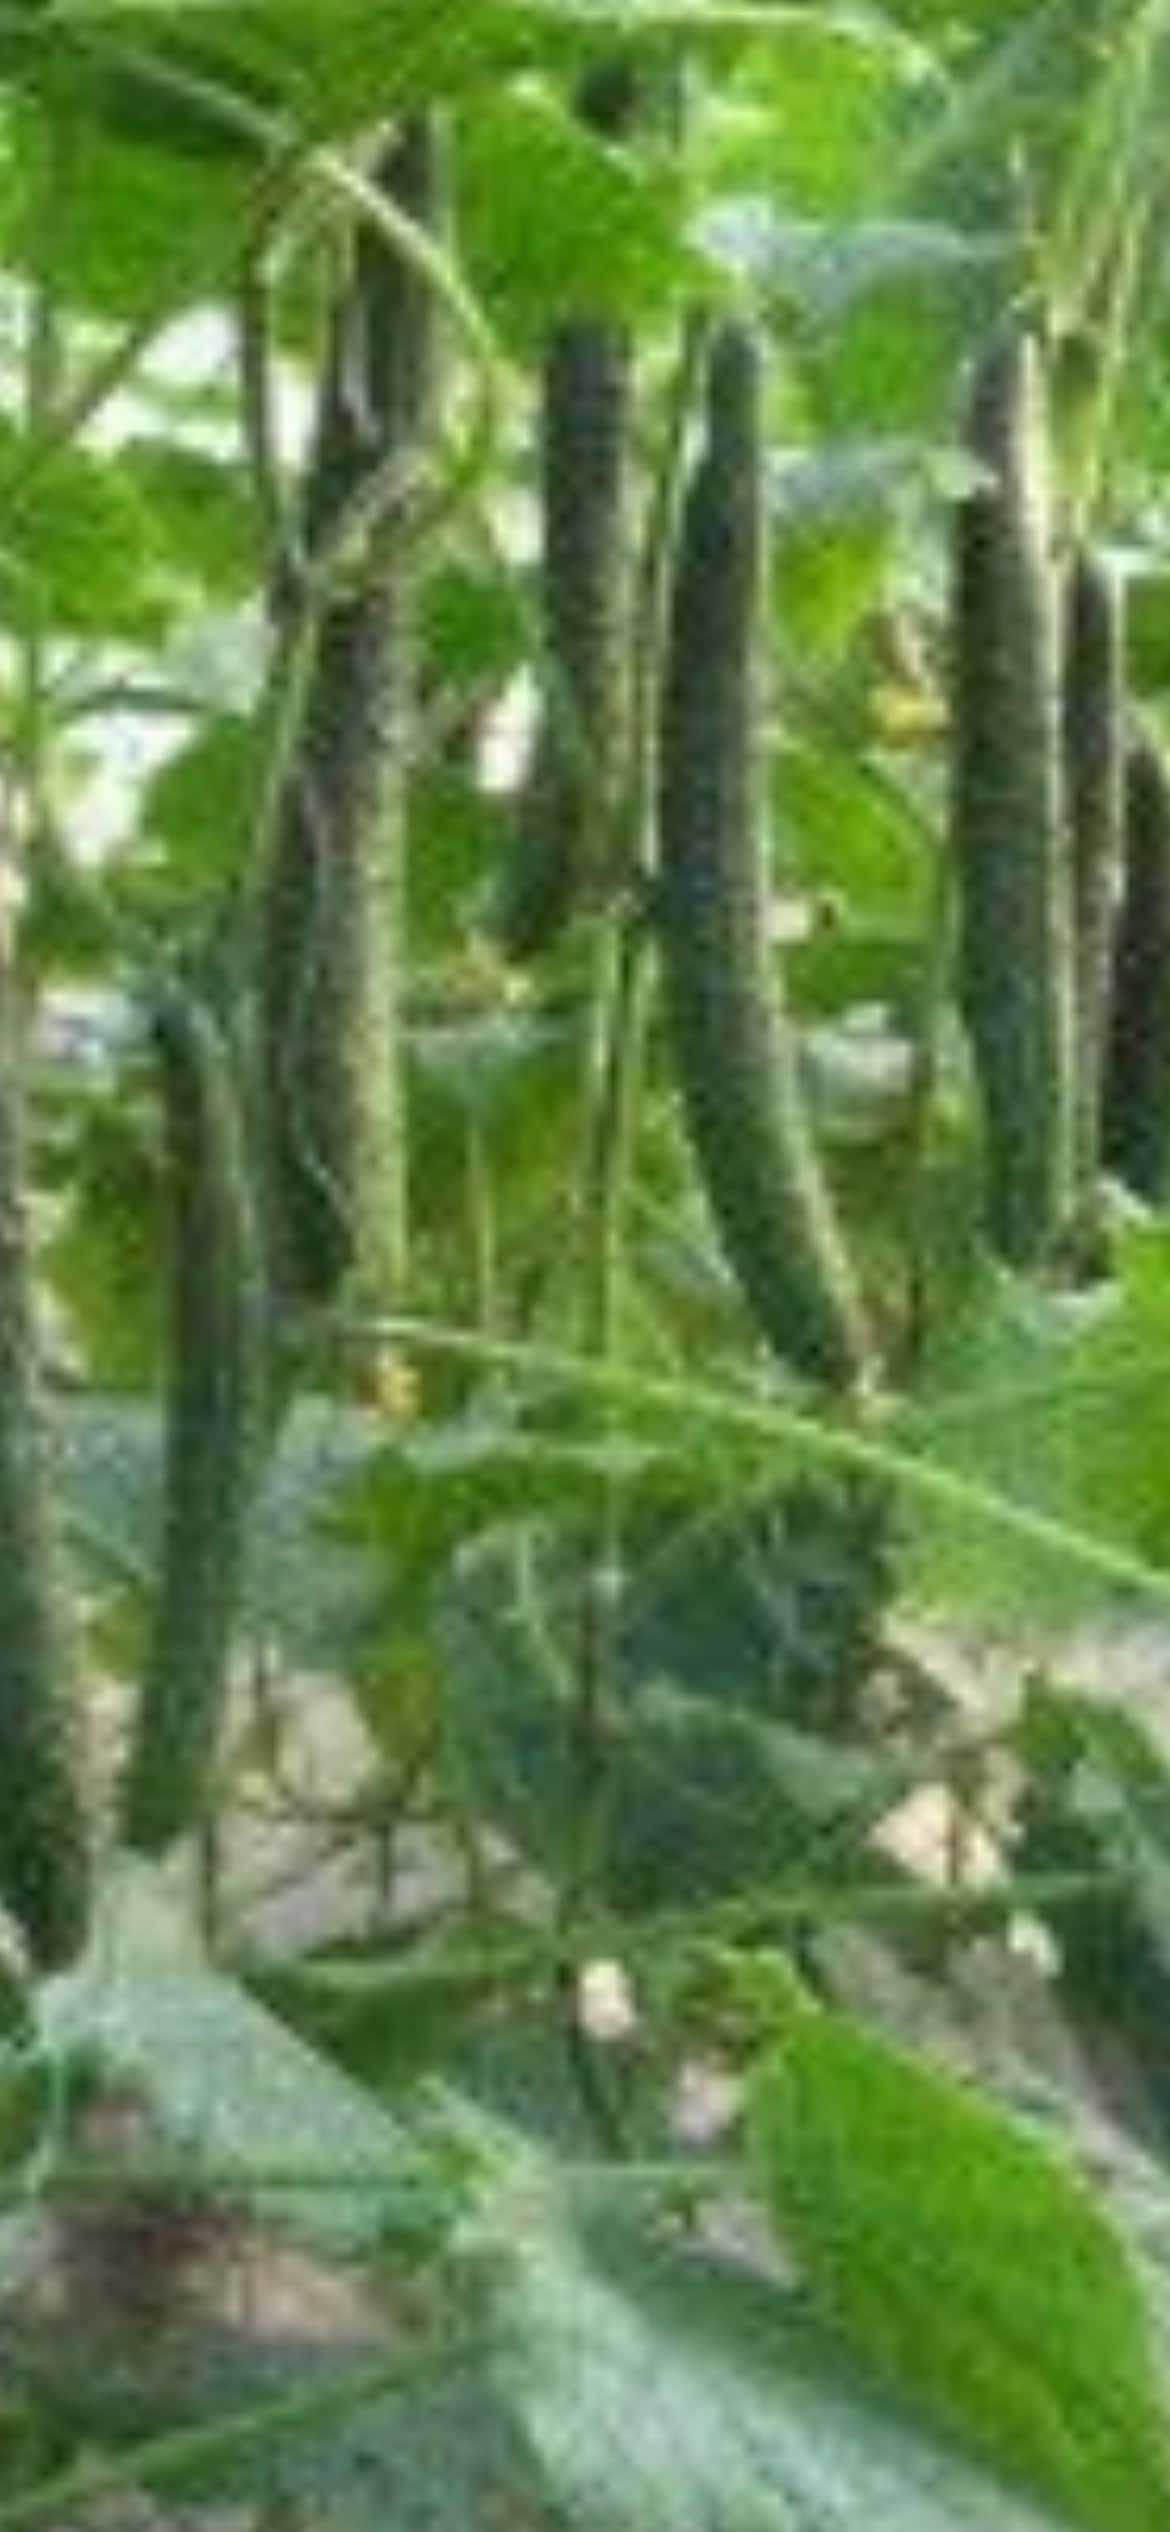 Jinyan Seven Cucumber Seeds - 津研七黄瓜-50 Seeds per Packet - High-Quality and Early Maturing Cucumber Variety